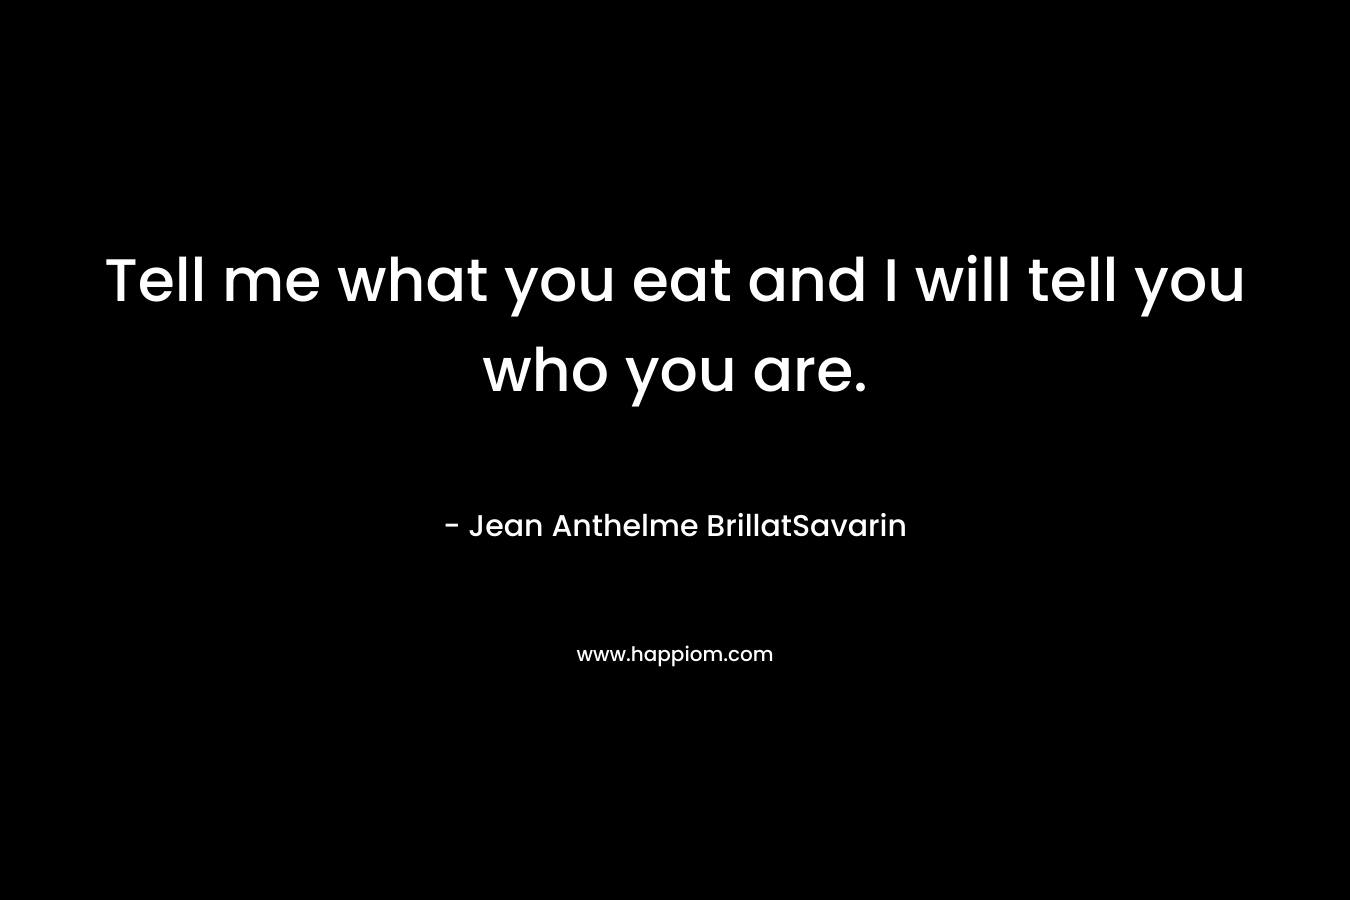 Tell me what you eat and I will tell you who you are.